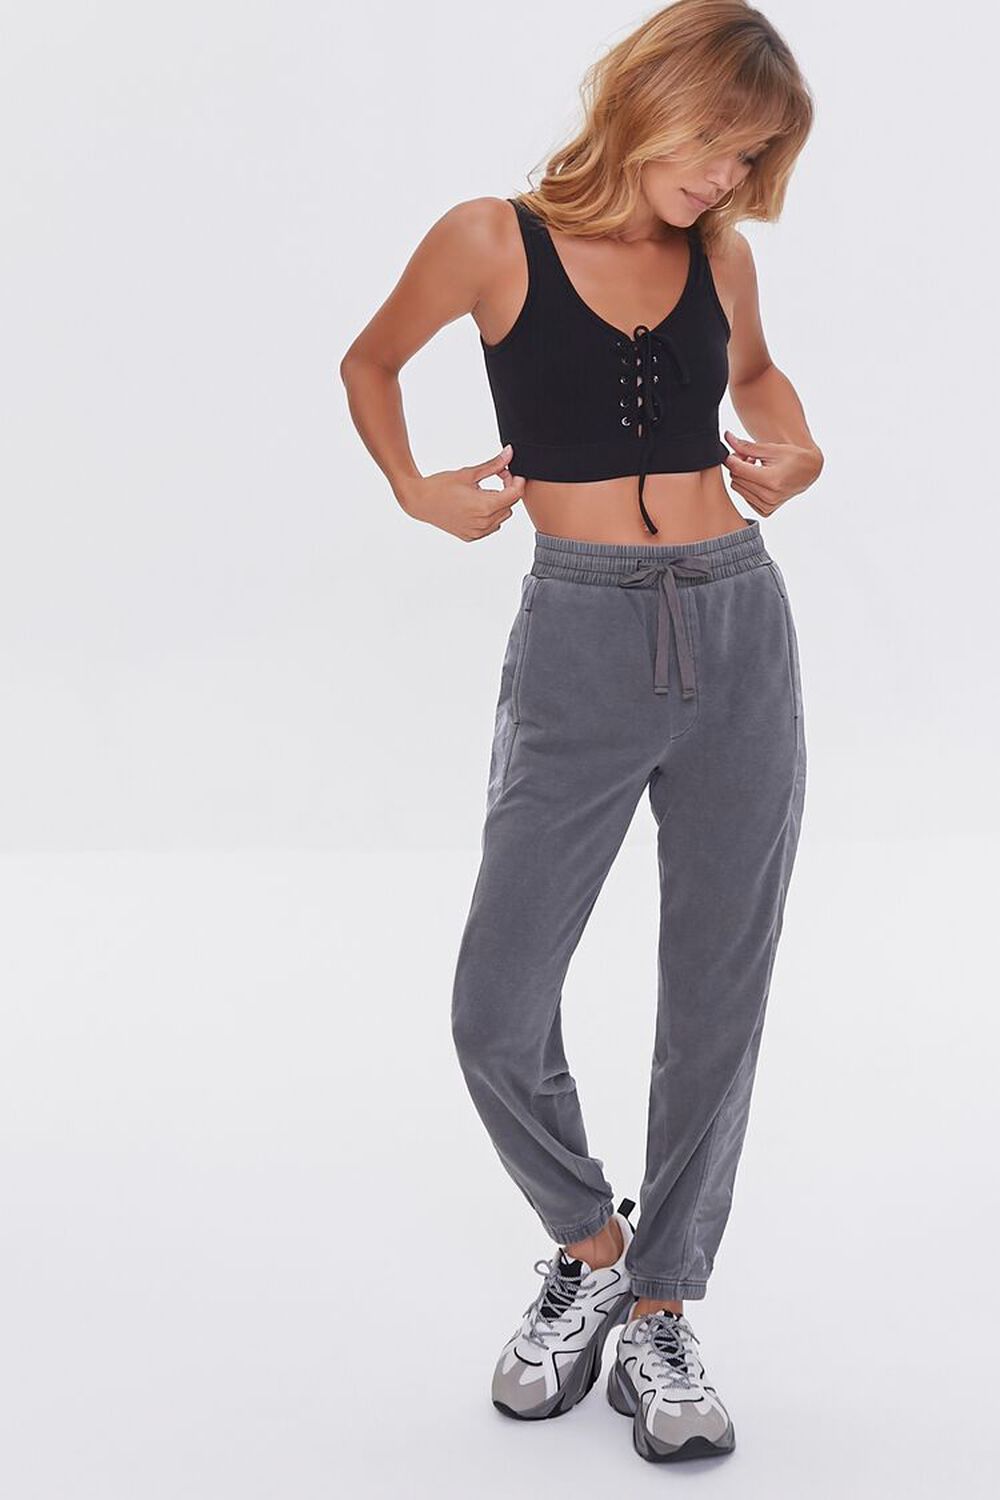 CHARCOAL Side-Striped Joggers, image 1